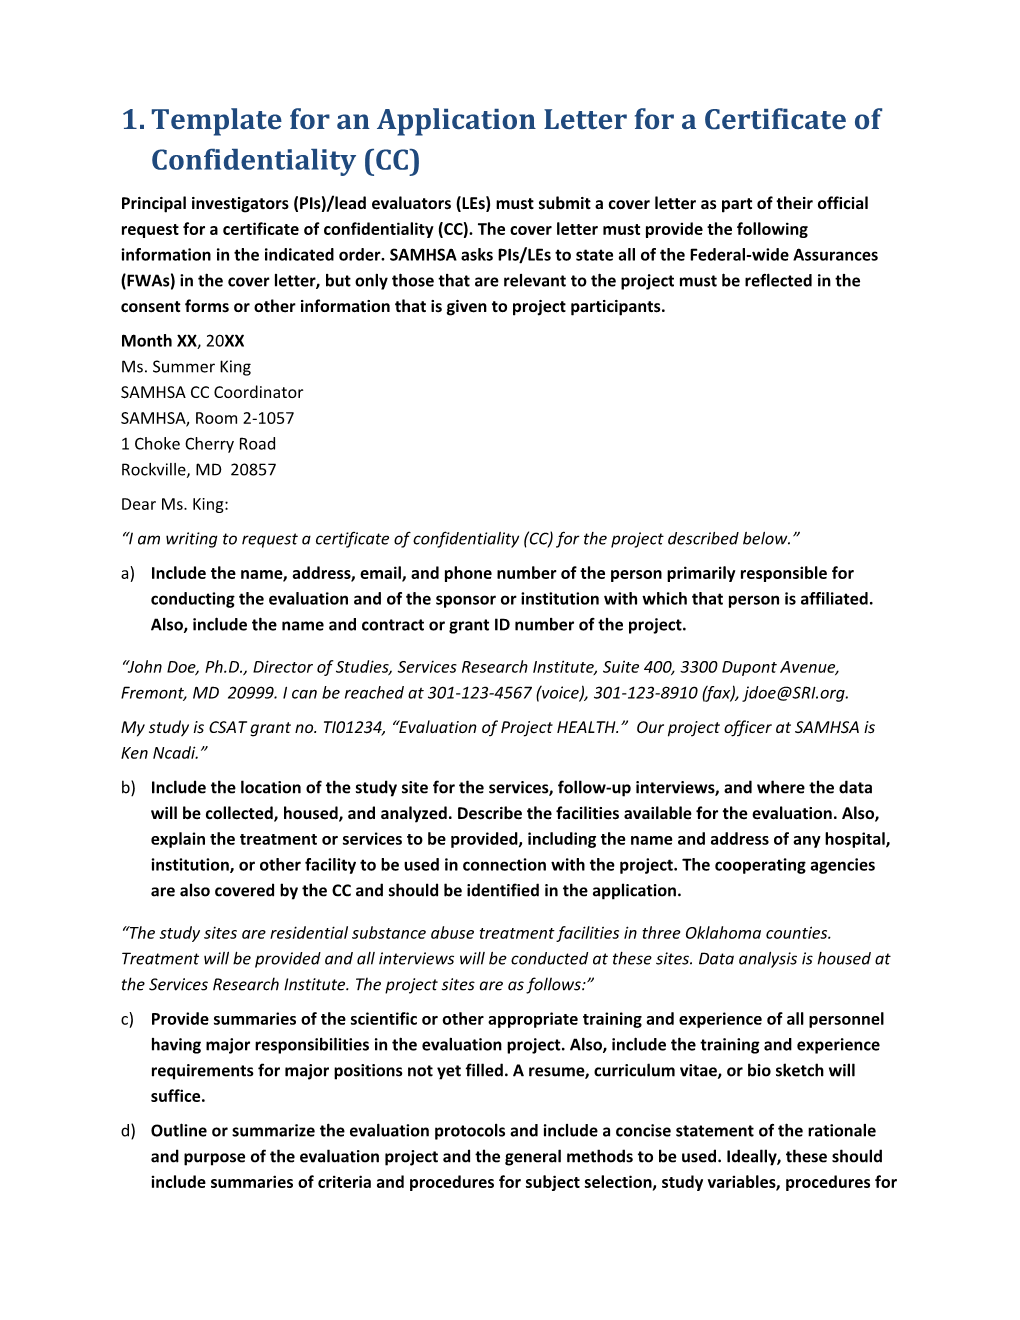 Template for an Application Letter for a Certificate of Confidentiality (CC)